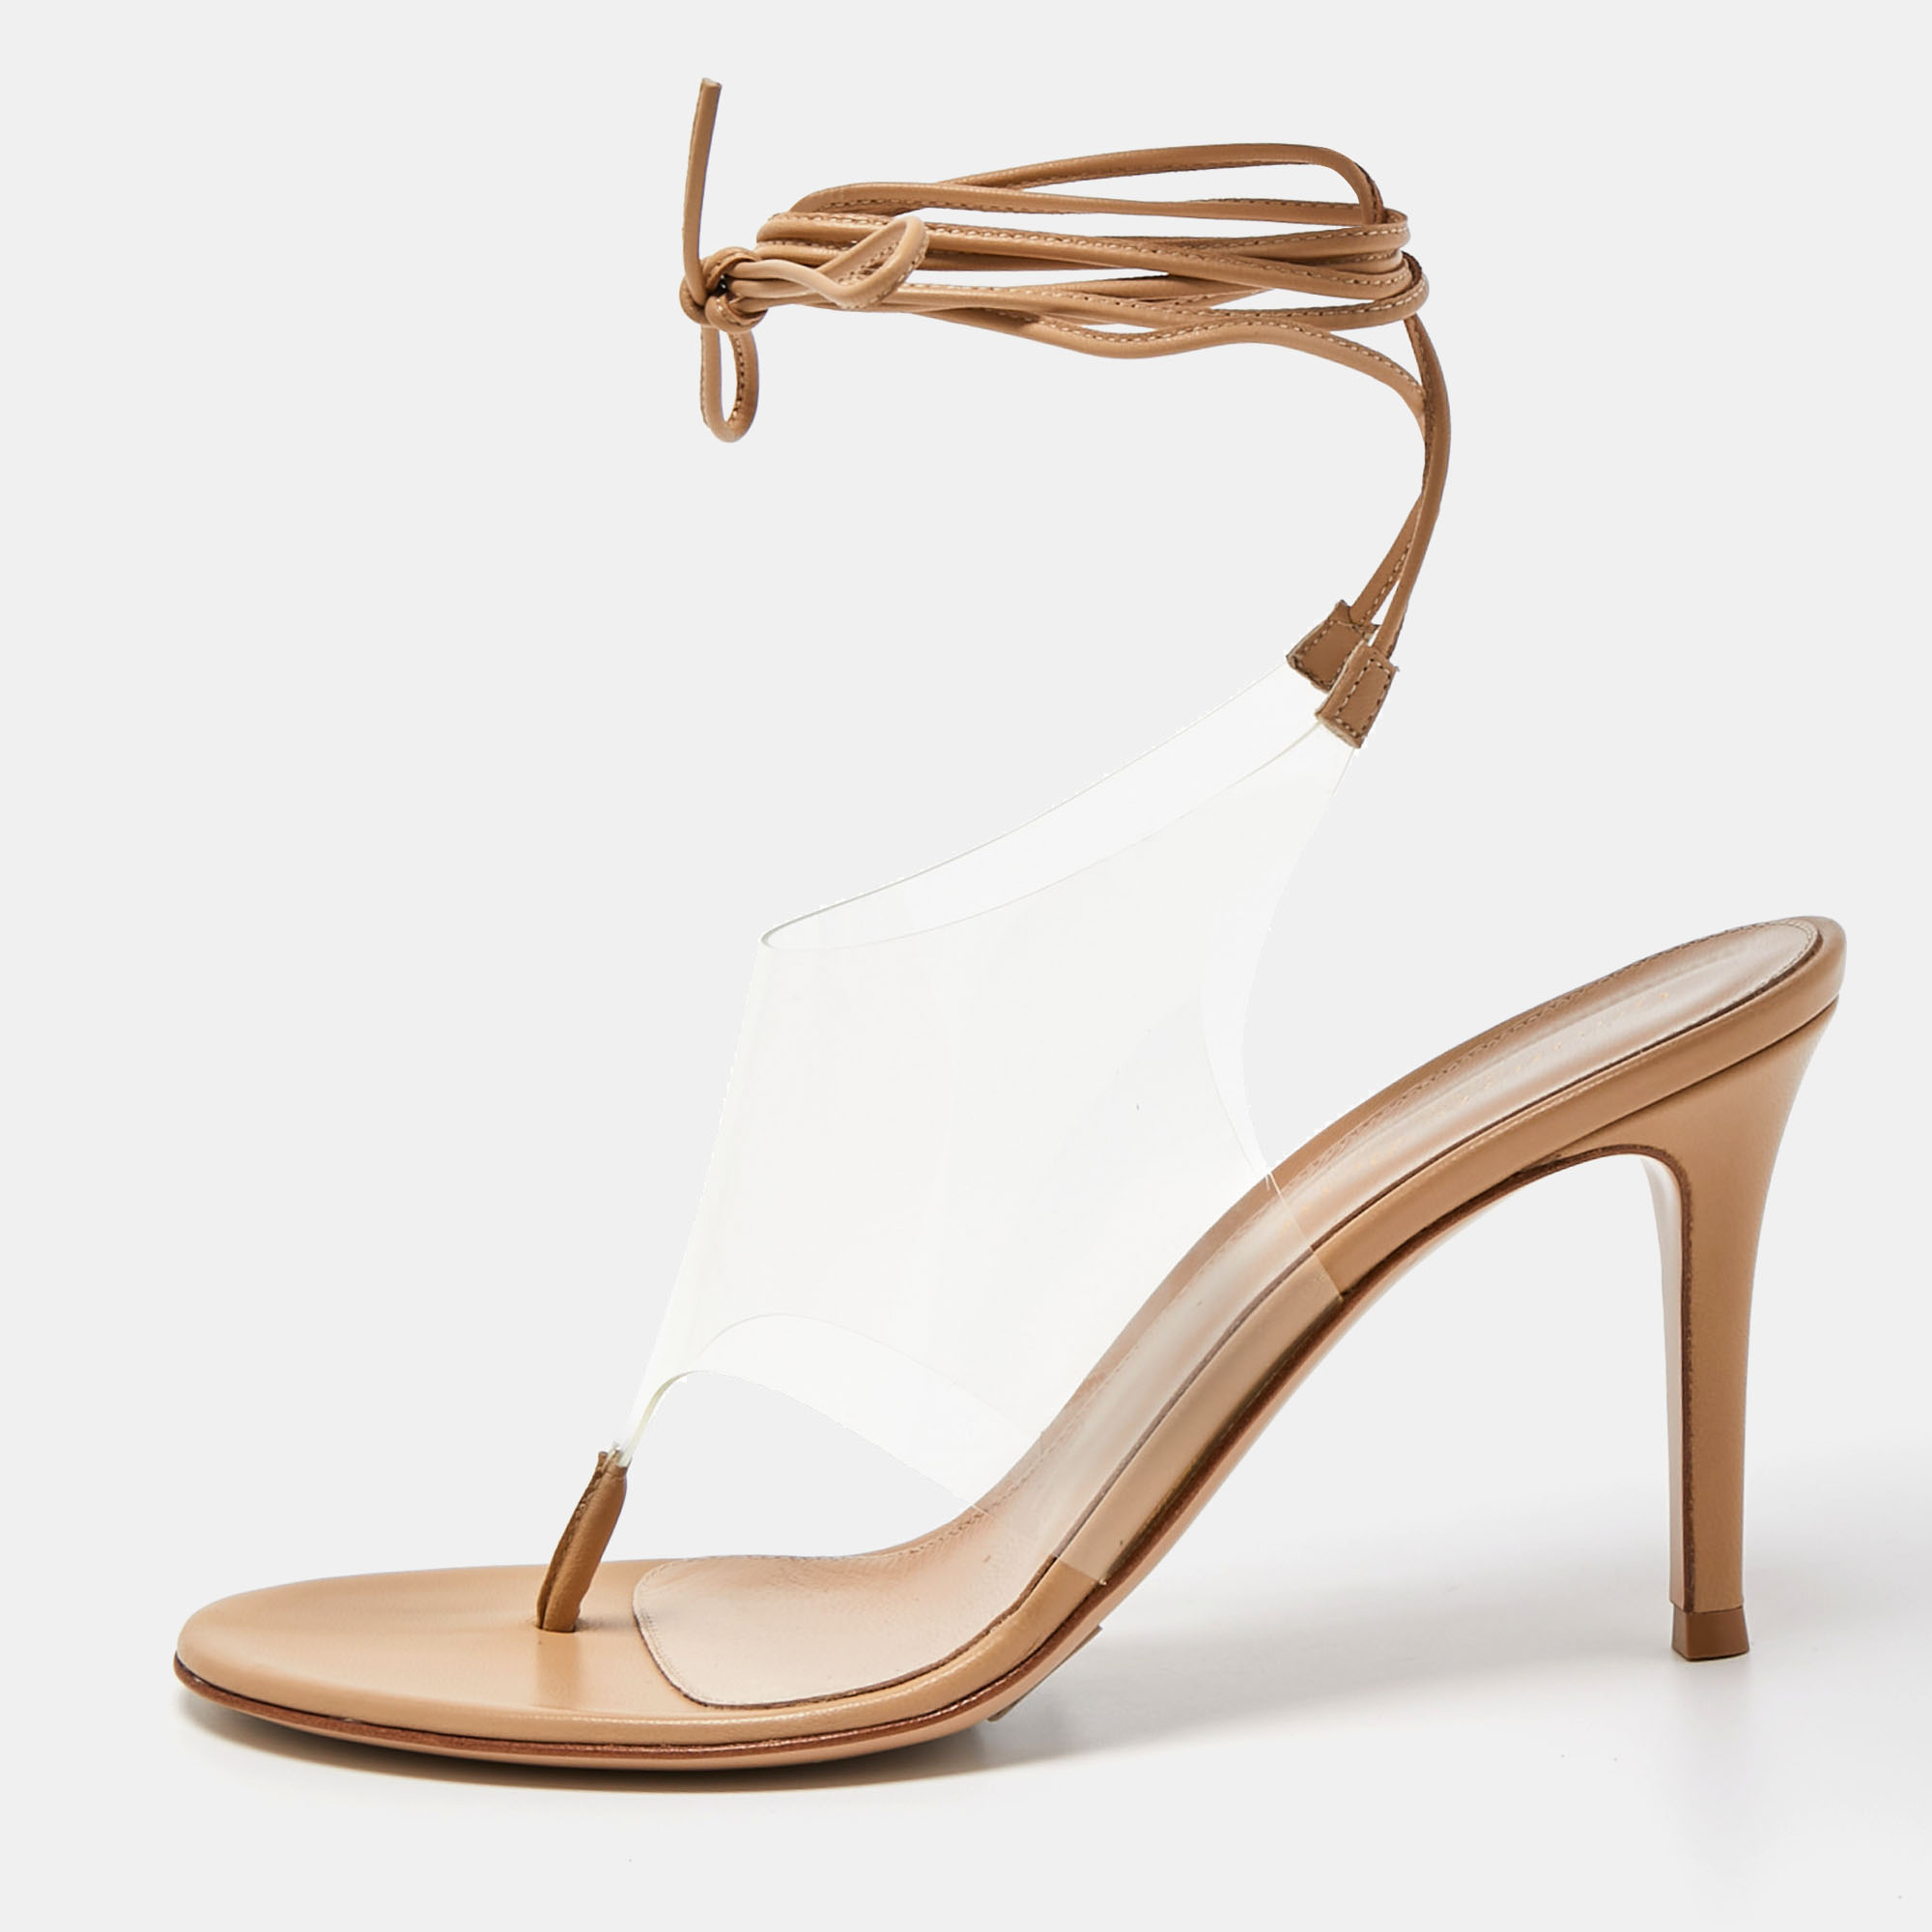 Gianvito Rossi Beige Leather And PVC  Ankle Wrap Sandals Size 37.5